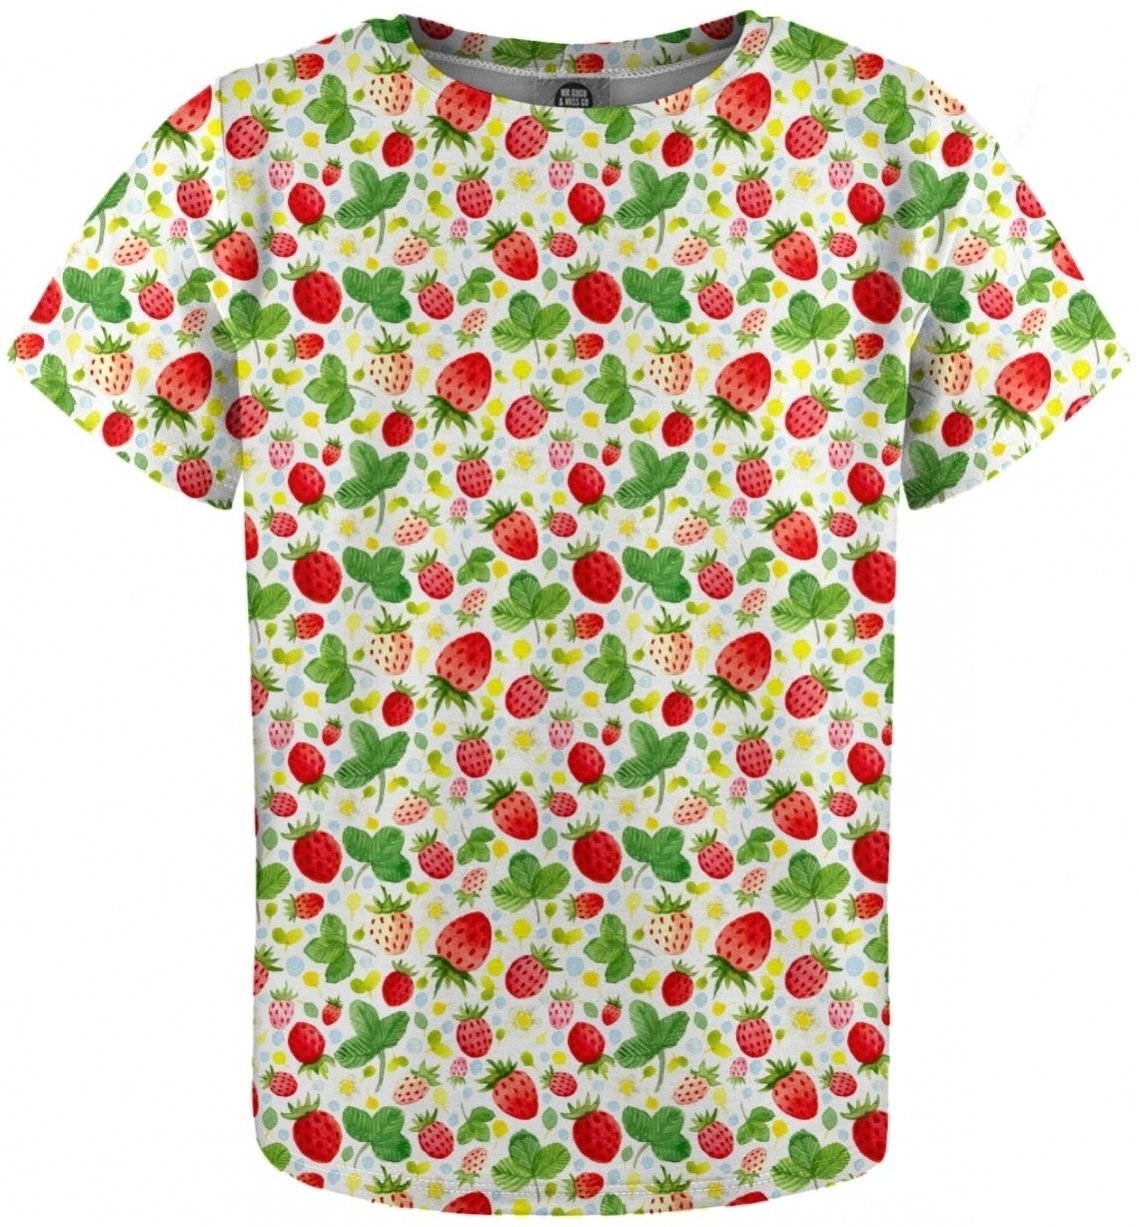 T-Shirt Mr. Gugu and Miss Go T-Shirt Strawberries Pattern 8 - 10 Y